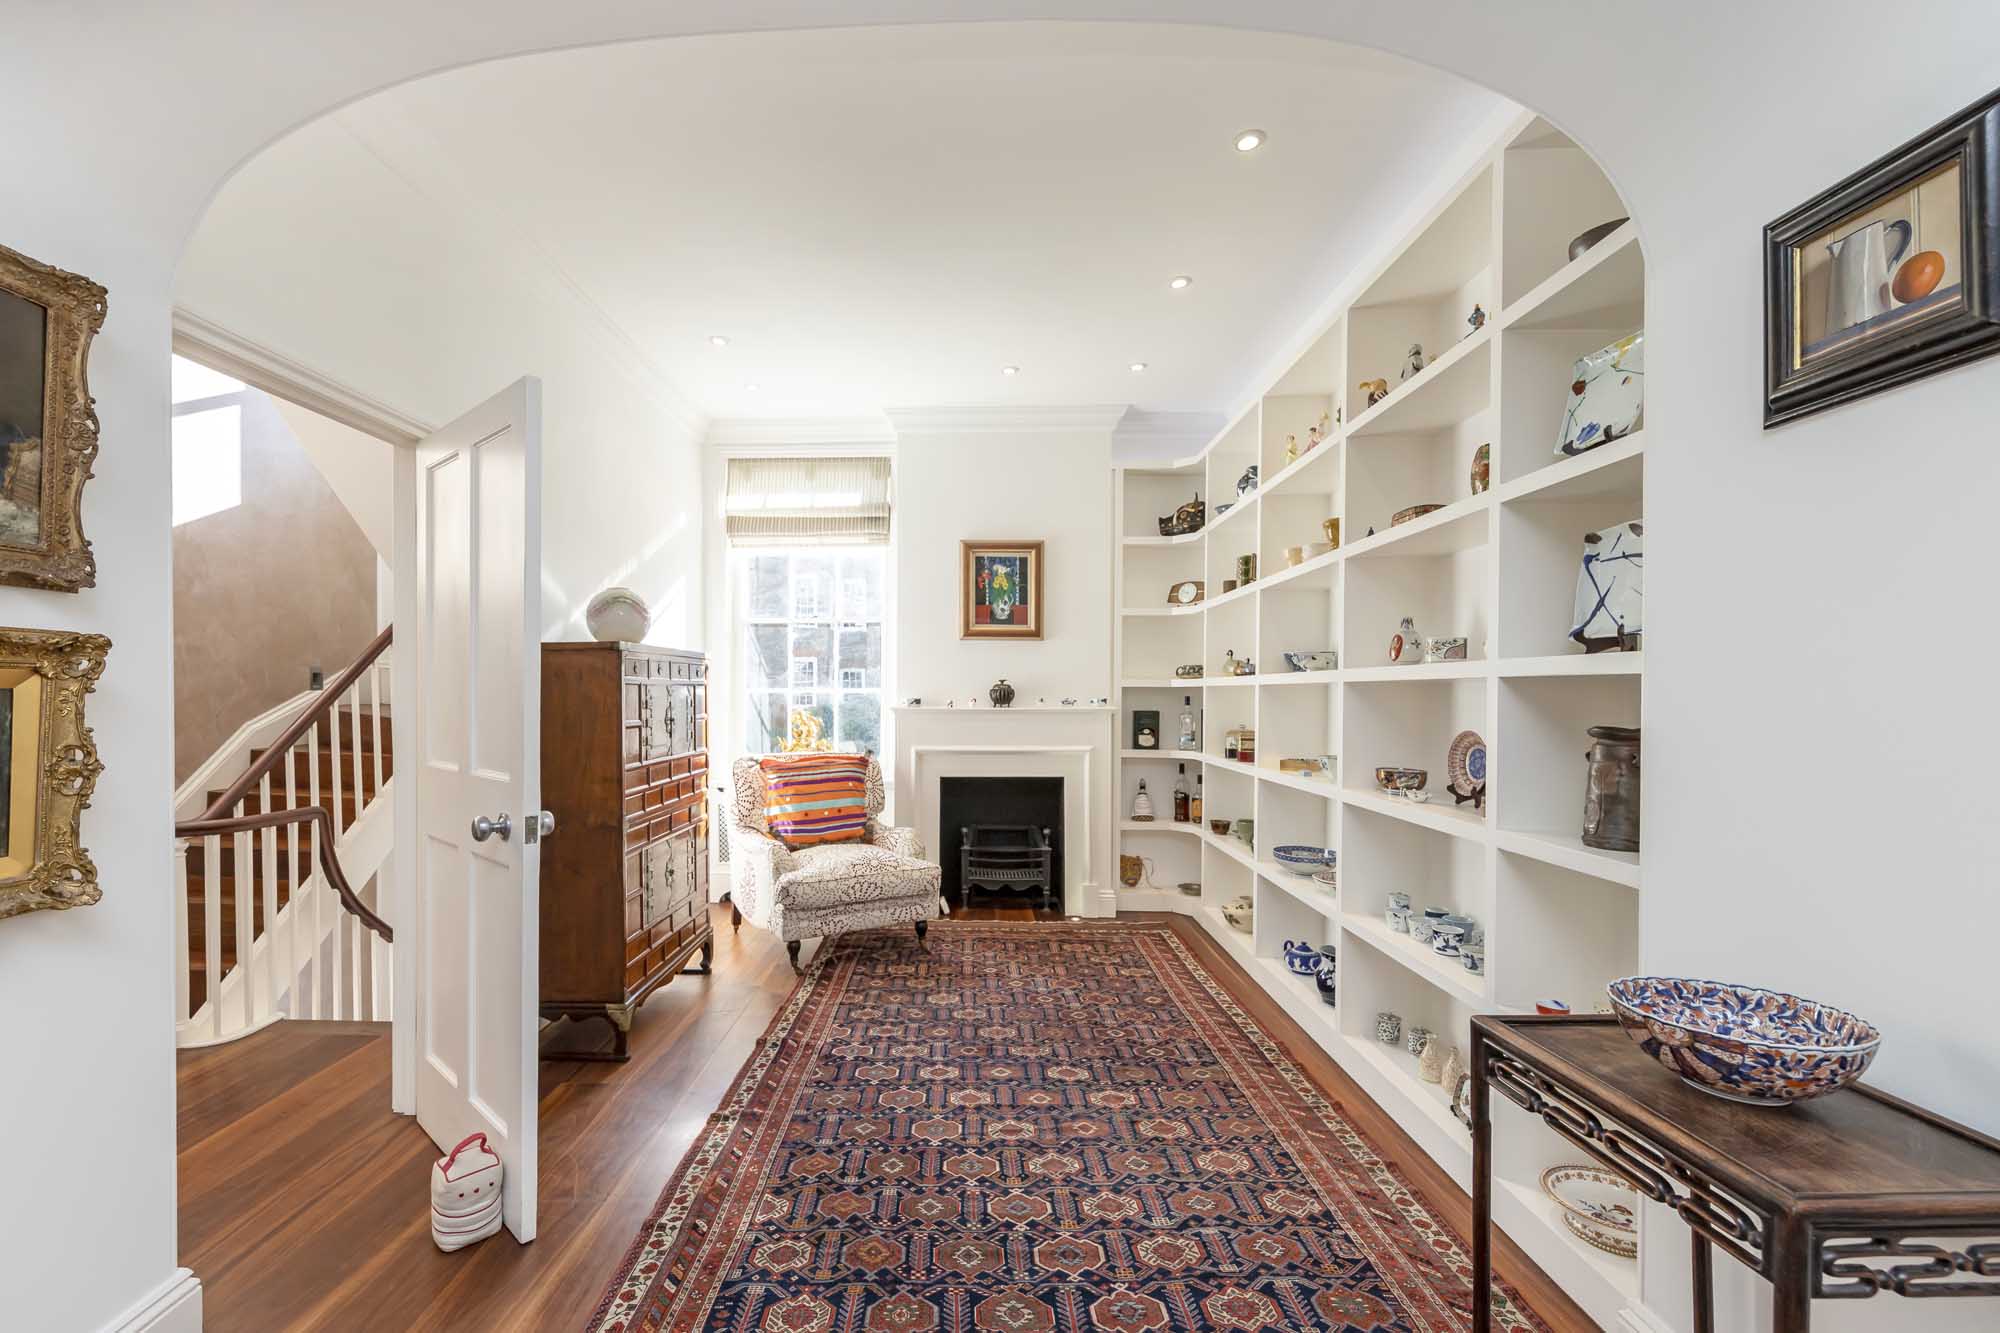 Historic Georgian townhouse on Stafford Place for sale